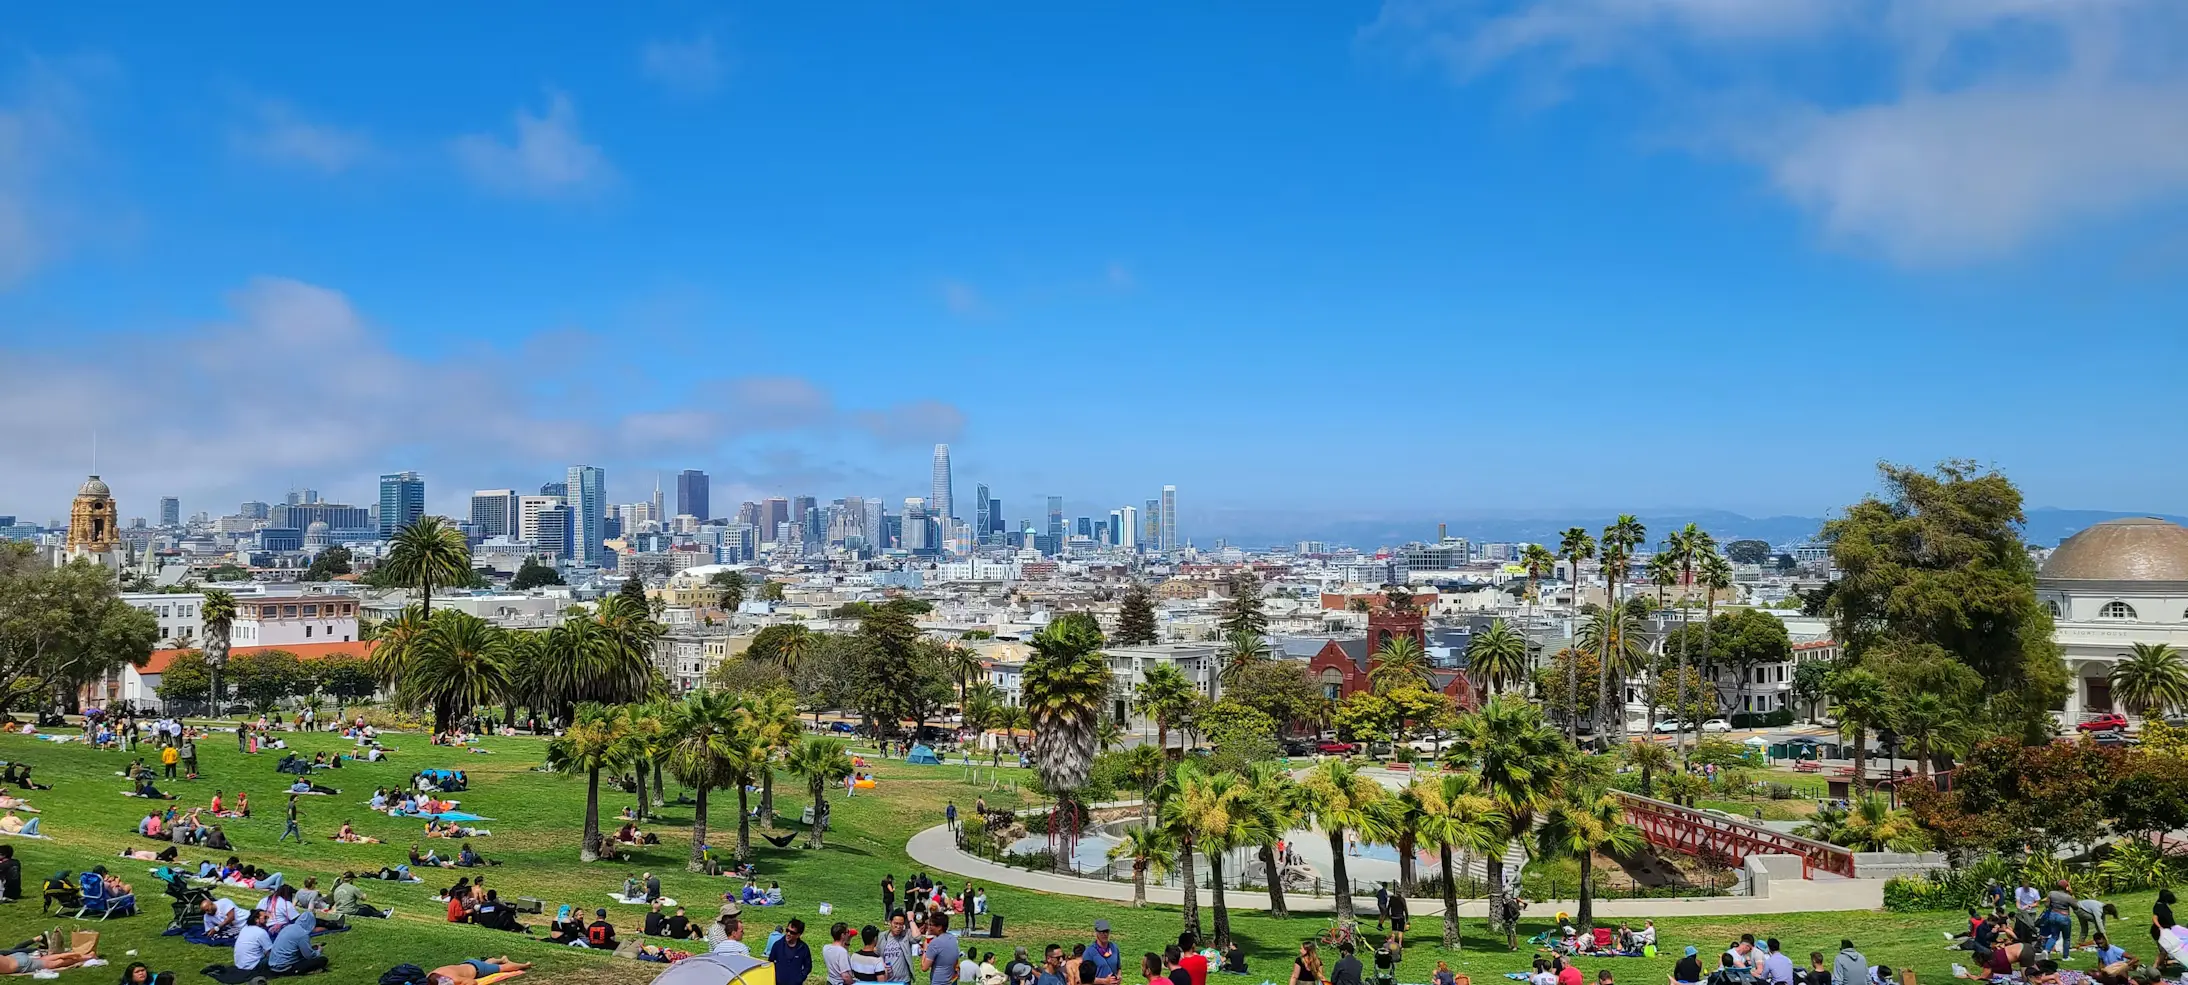 Mission Dolores is the oldest neighborhood in San Francisco, California.